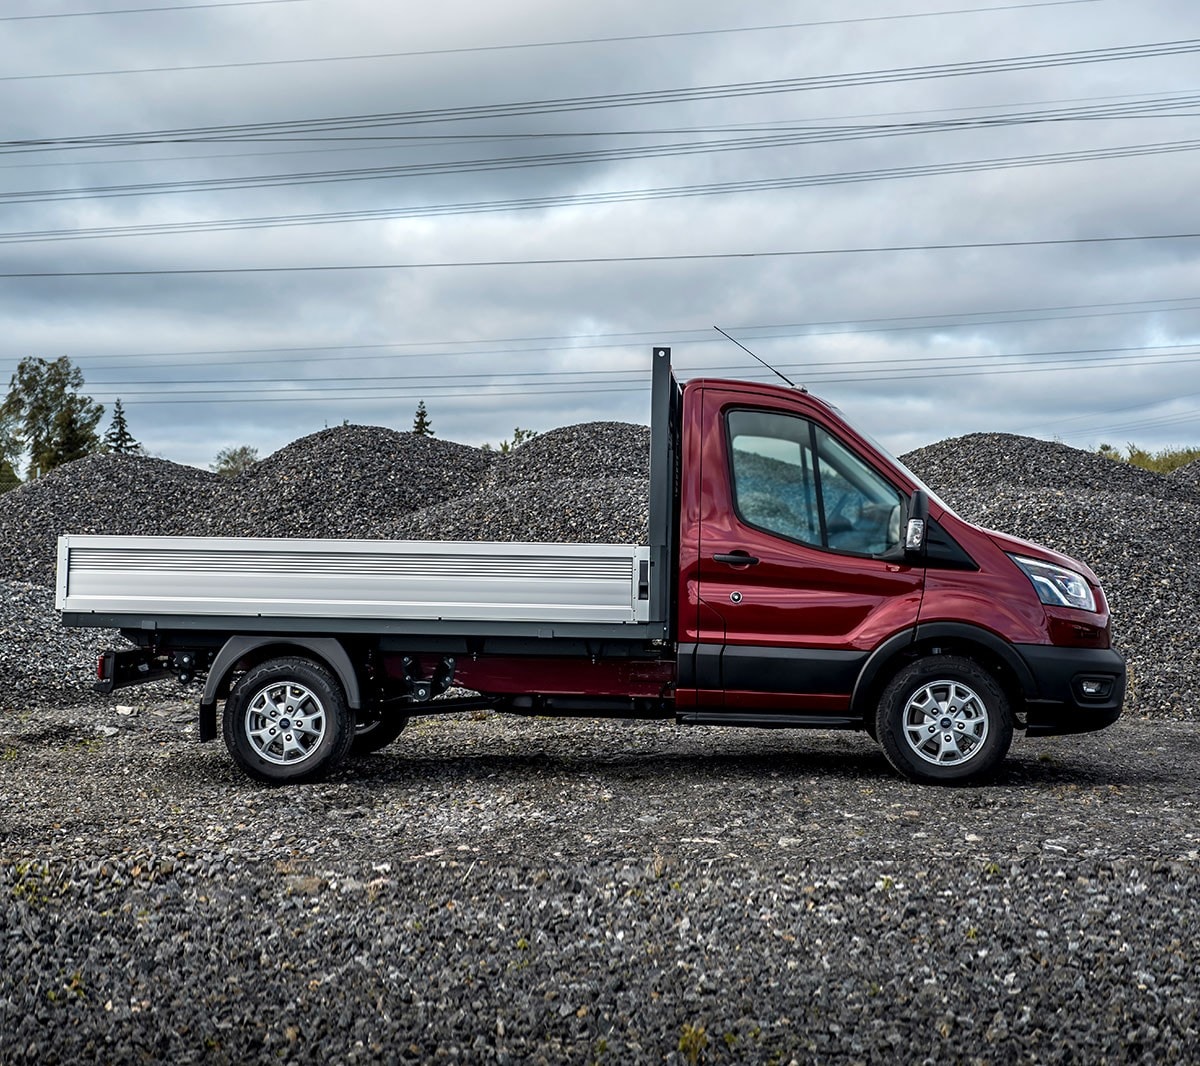 Ford Transit Chassis Cab side view